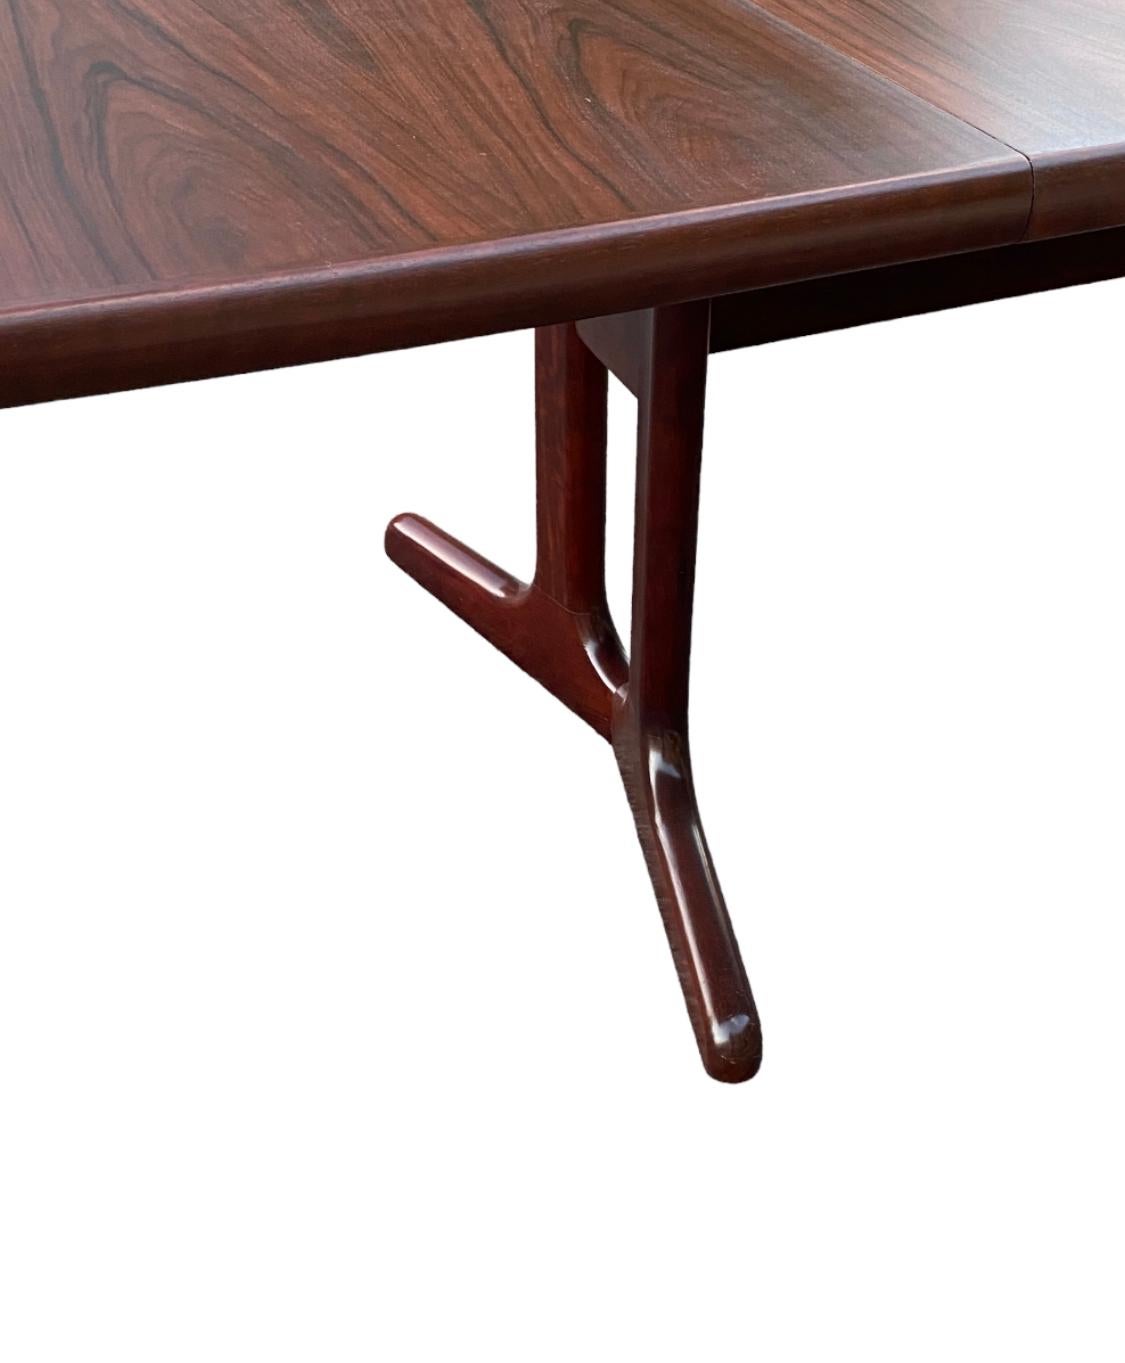 20th Century Danish Modern Rosewood Dining Table with 2 Leaves